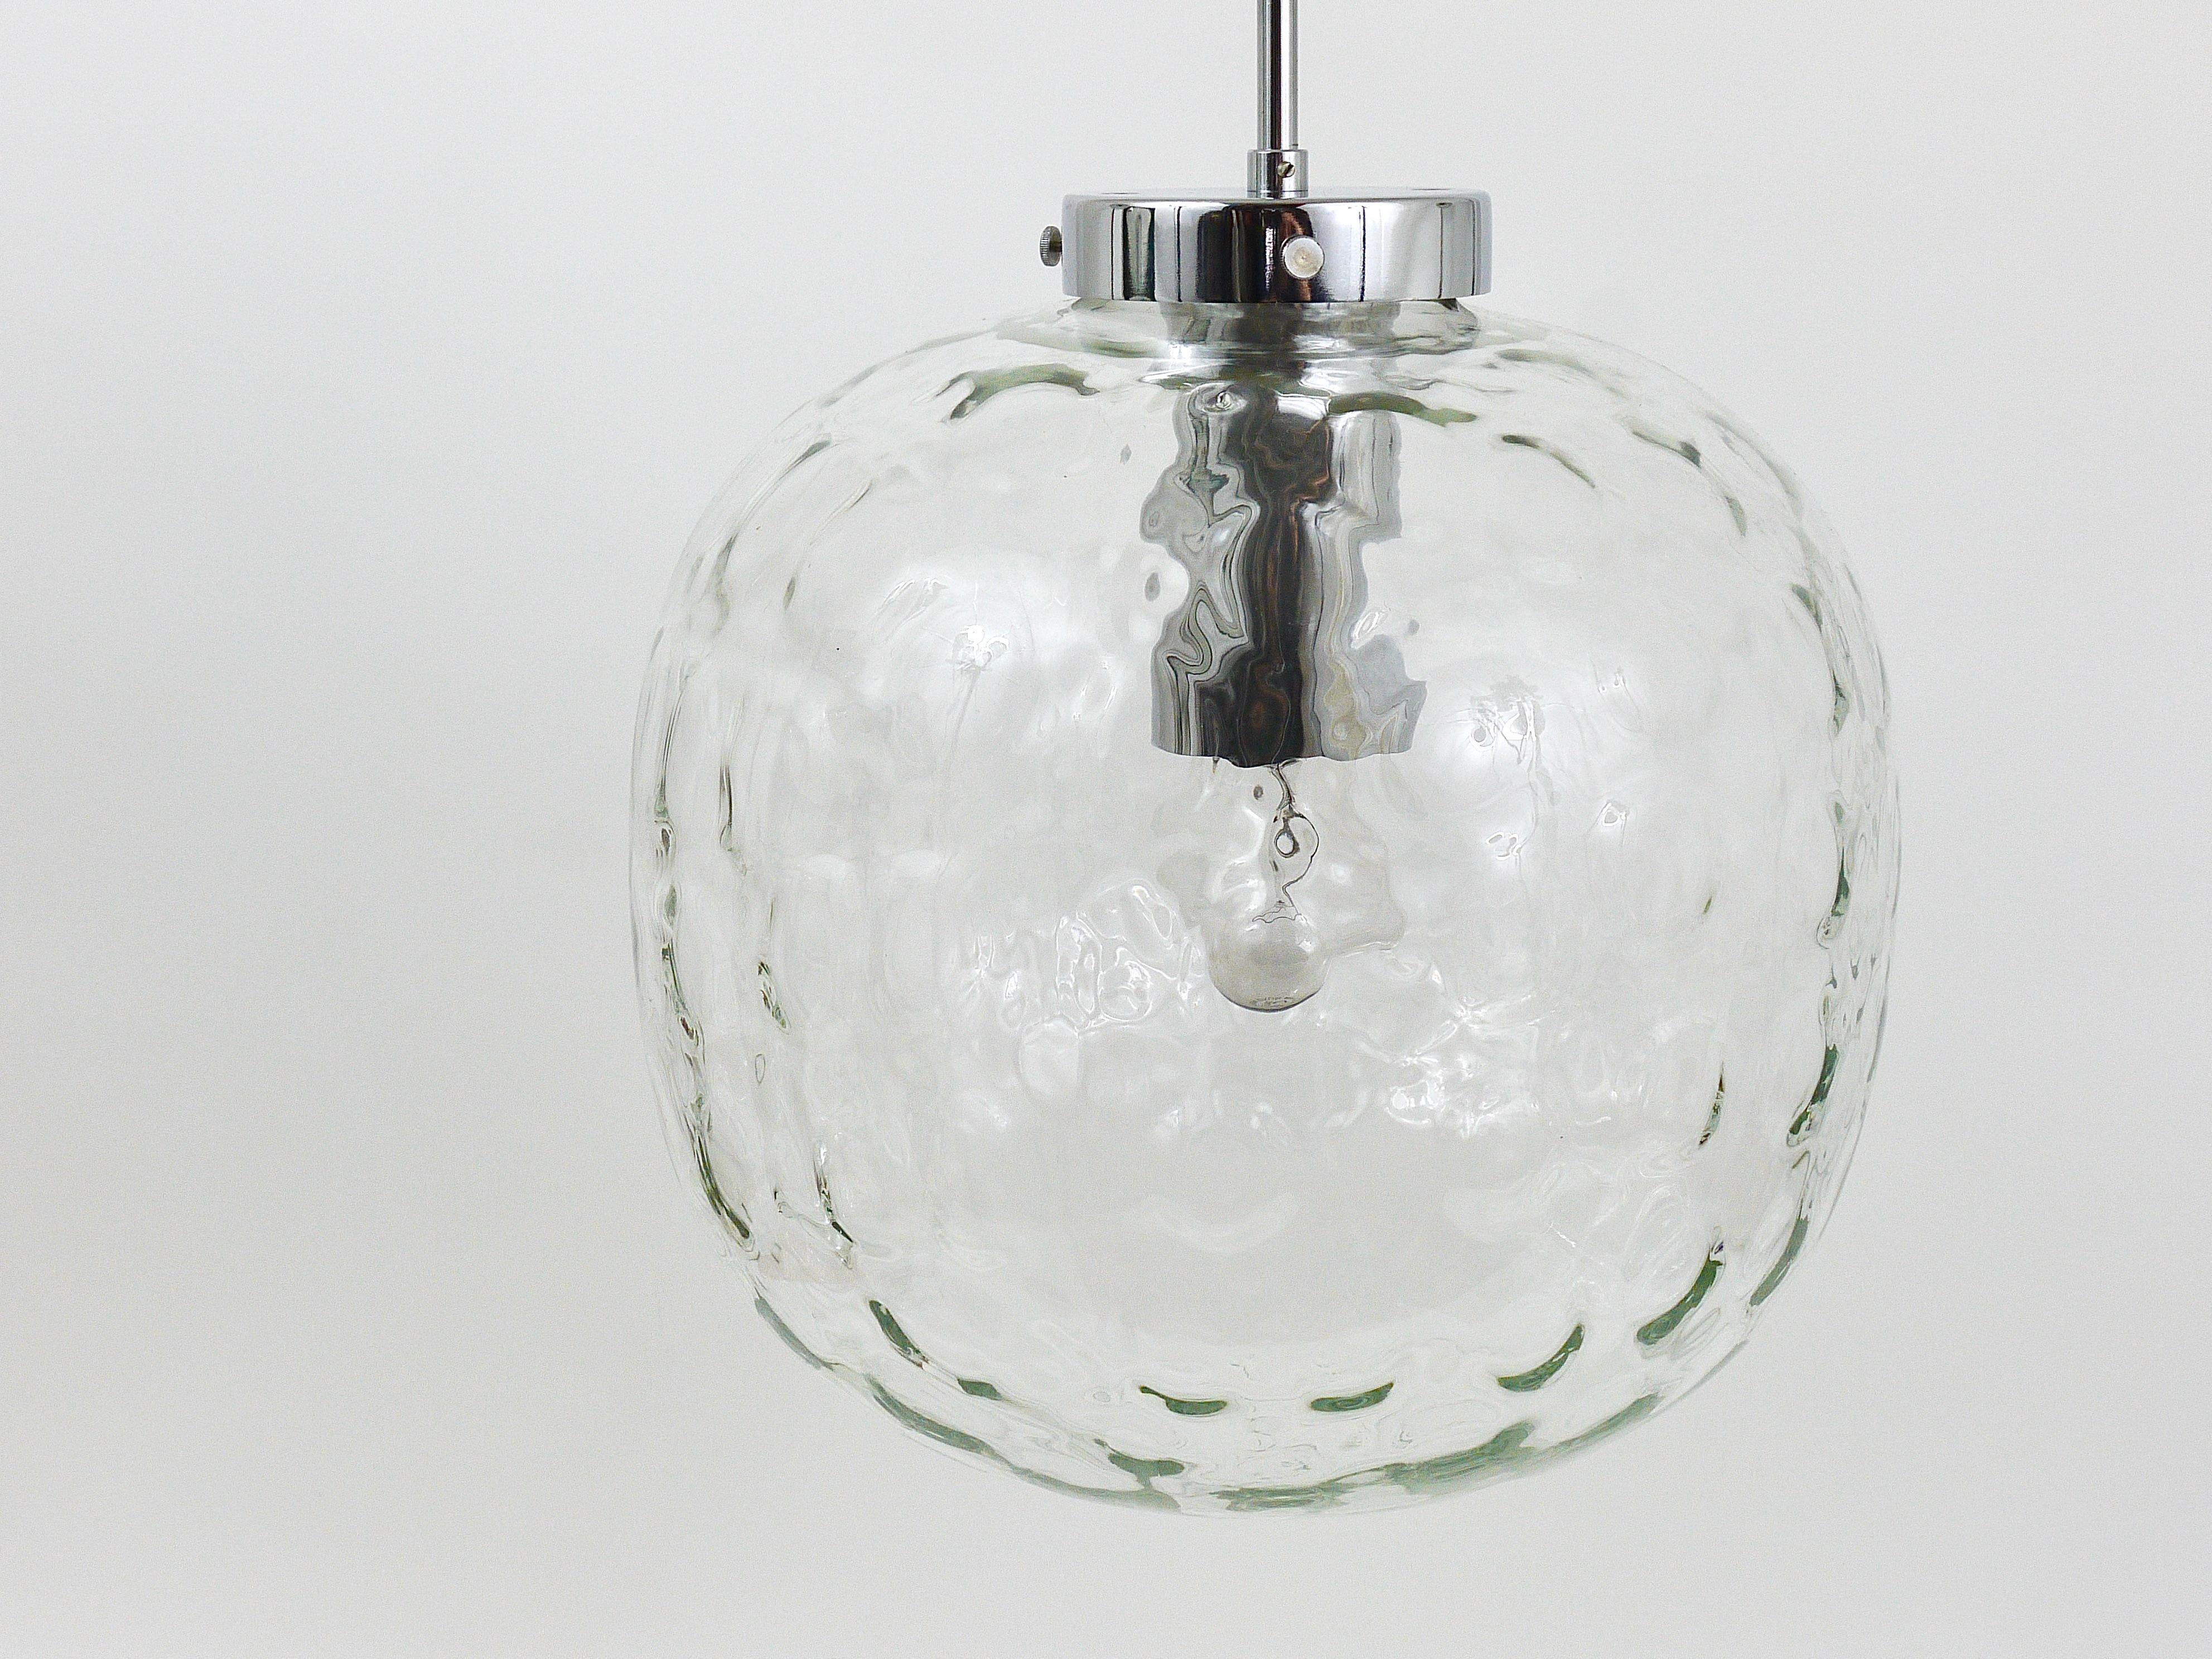 Large Bubble Melting Glass and Chrome Globe Pendant Lamp, Germany, 1970s For Sale 11